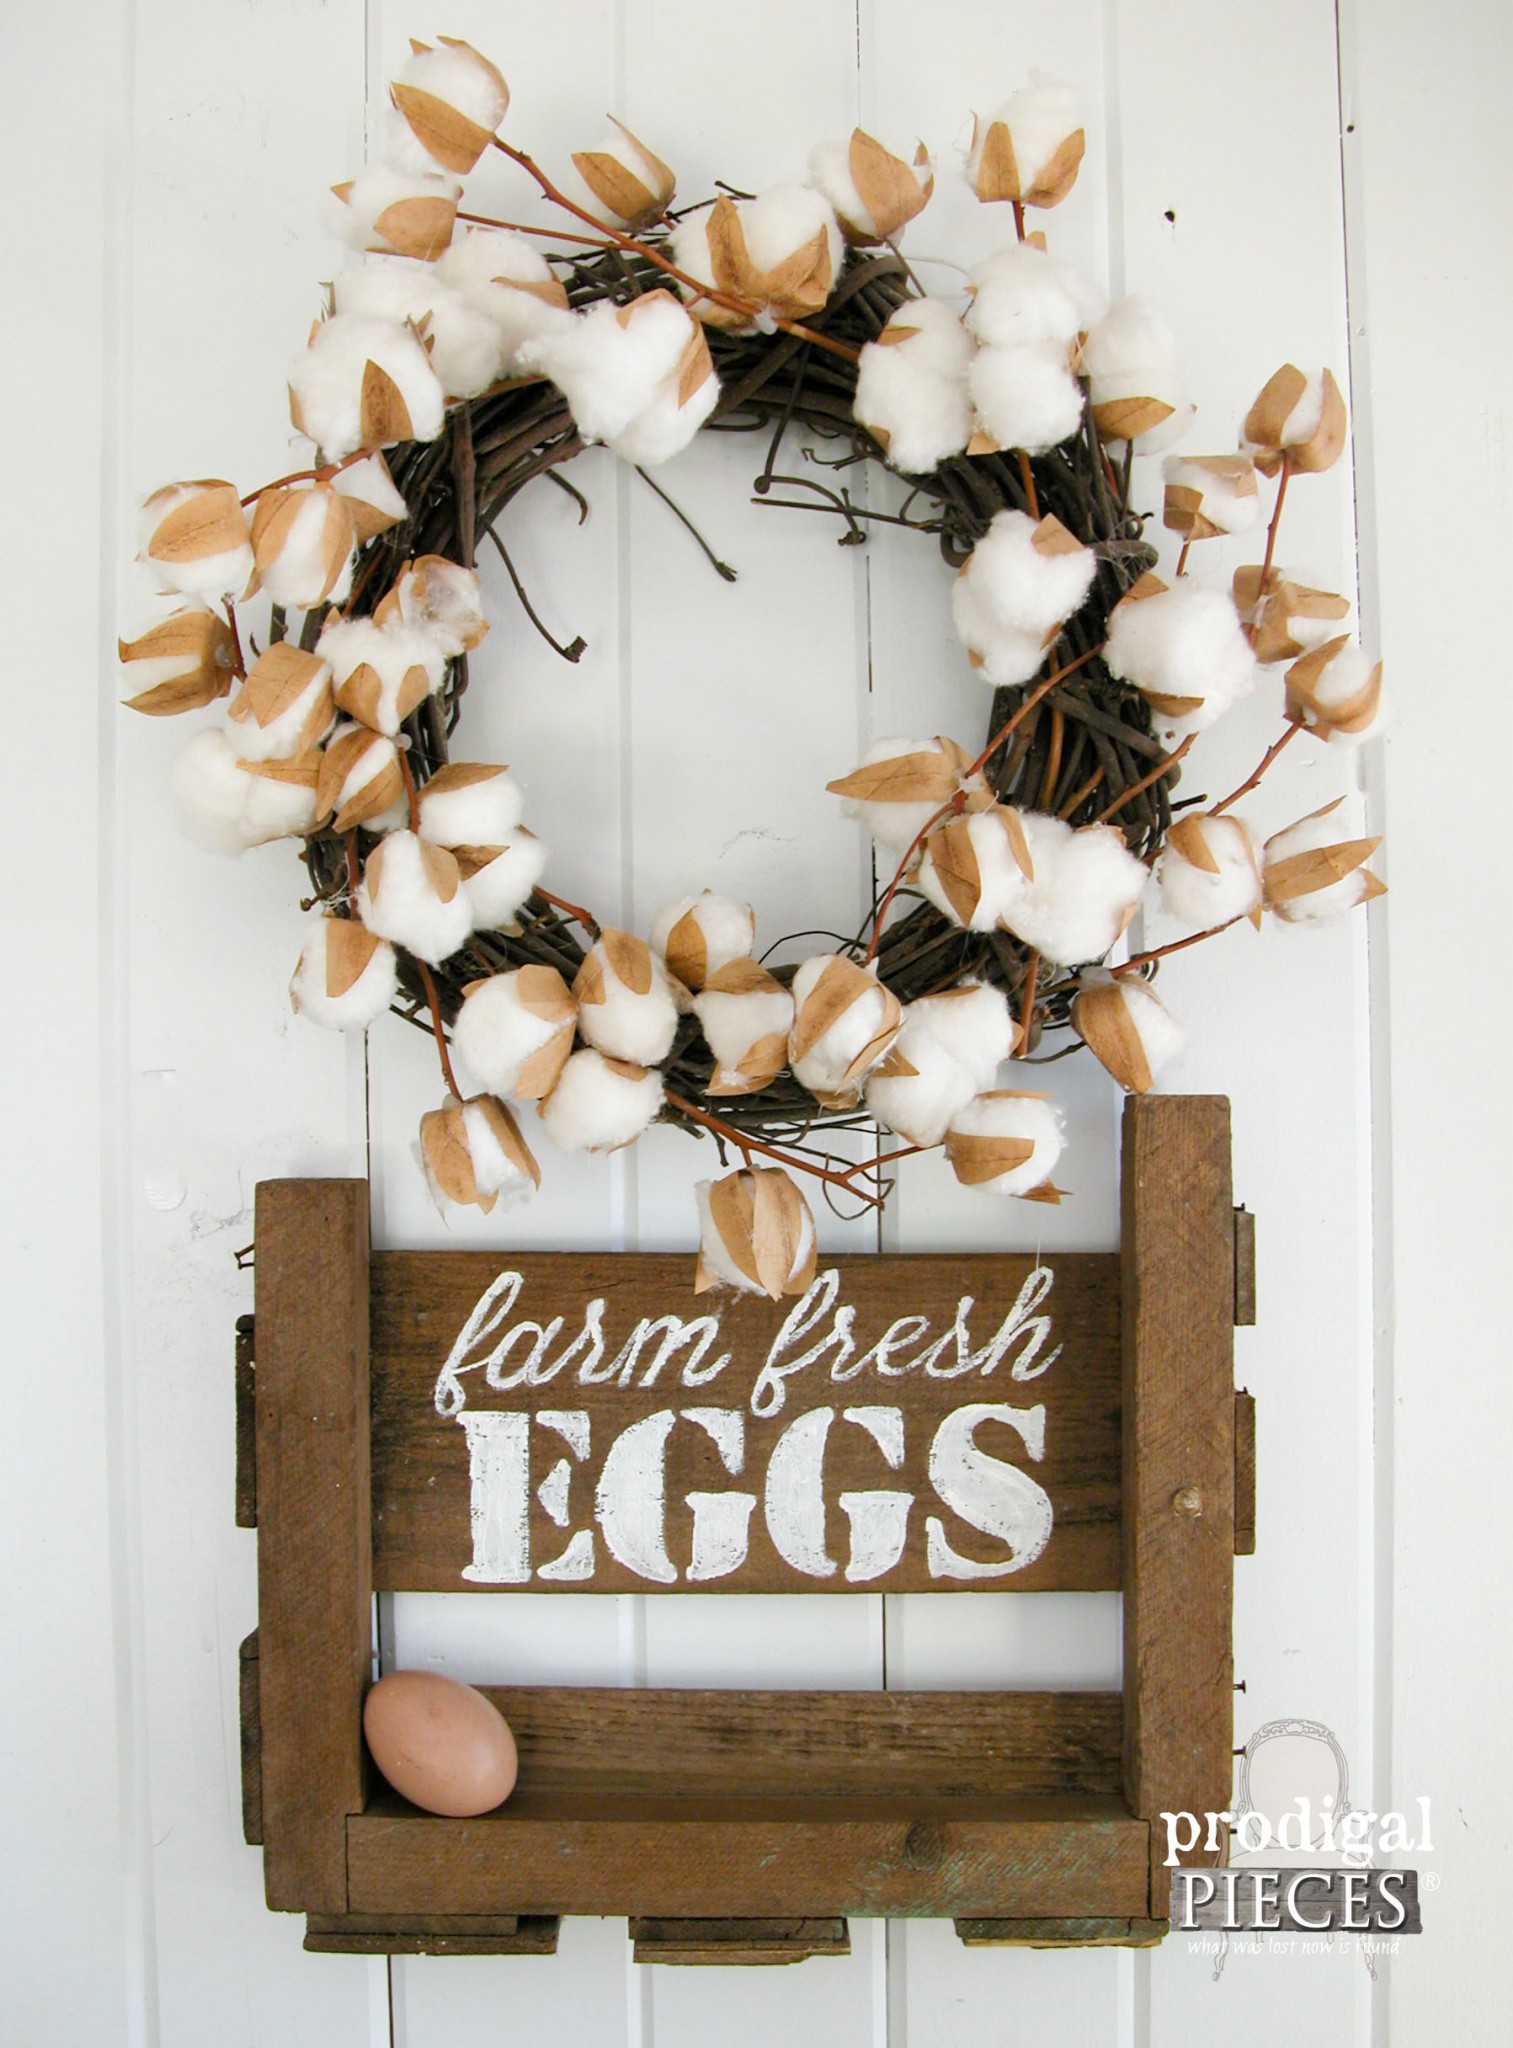 Handmade Repurposed Crate "Farm Fresh Eggs" Sign by Prodigal Pieces | www.prodigalpieces.com